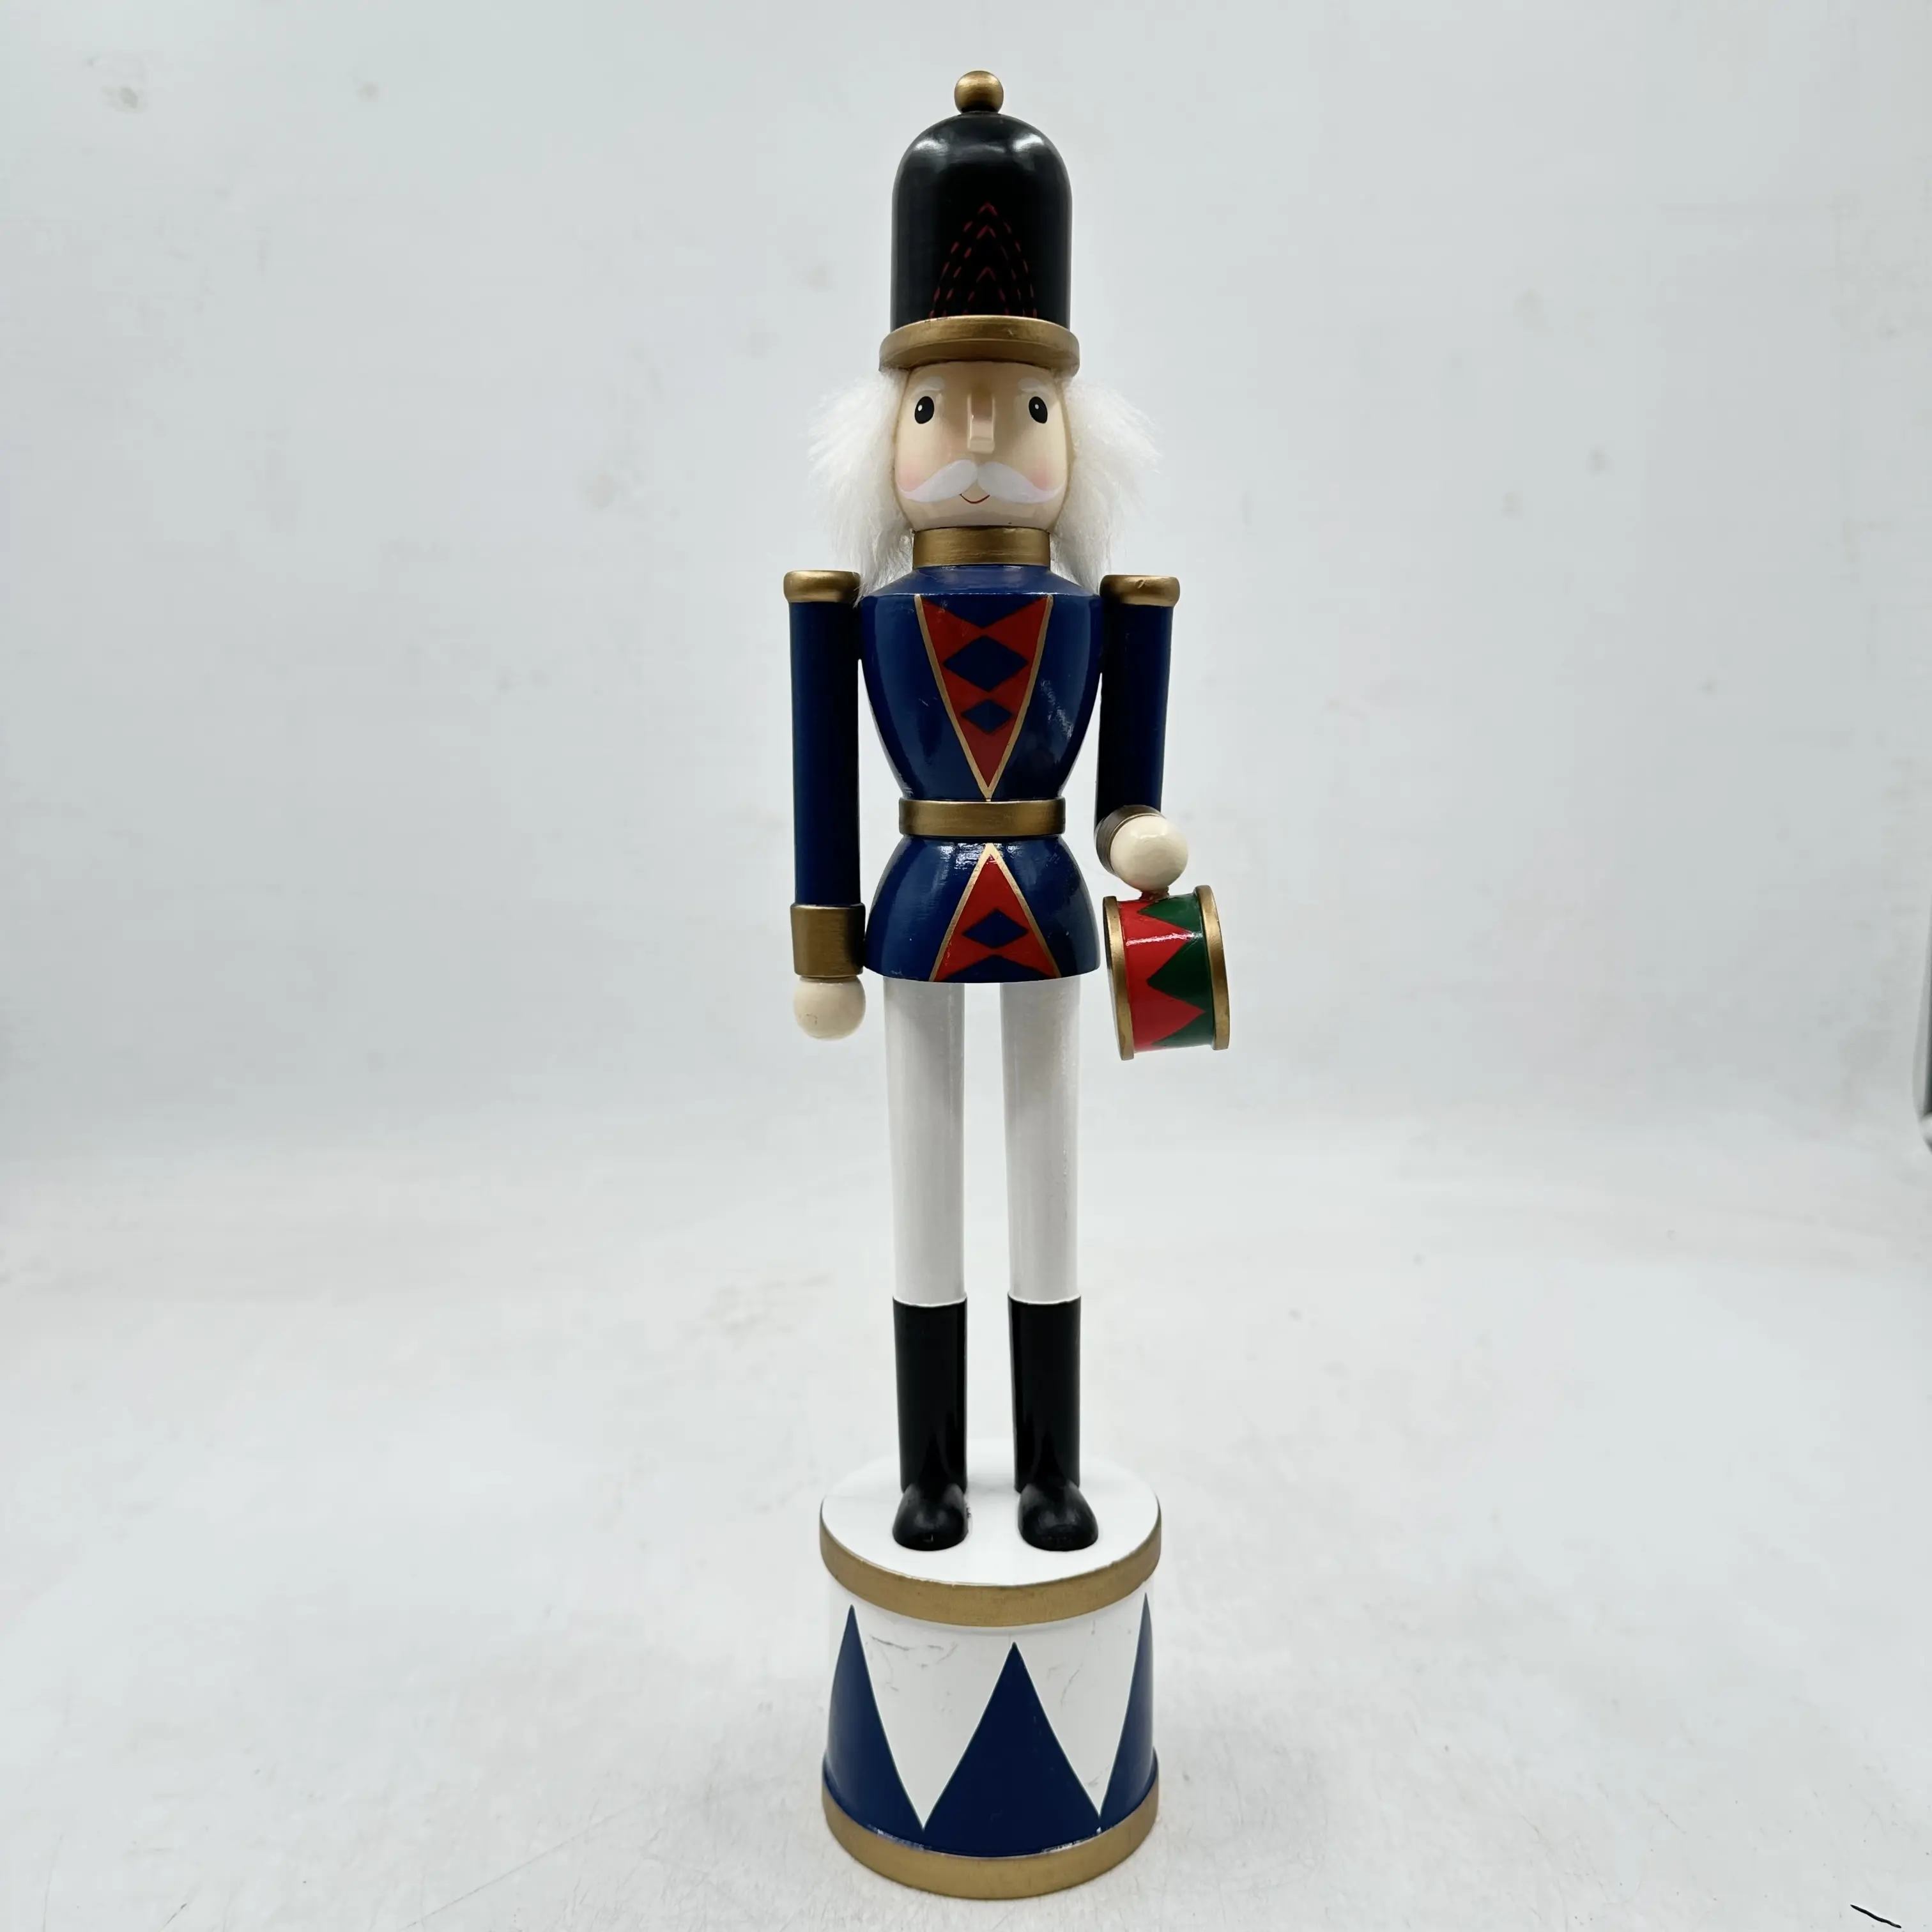 Home Decoration Wooden Soldier Walnut Nutcracker King Toy Soldiers People Nutcracker For Christmas Decoration